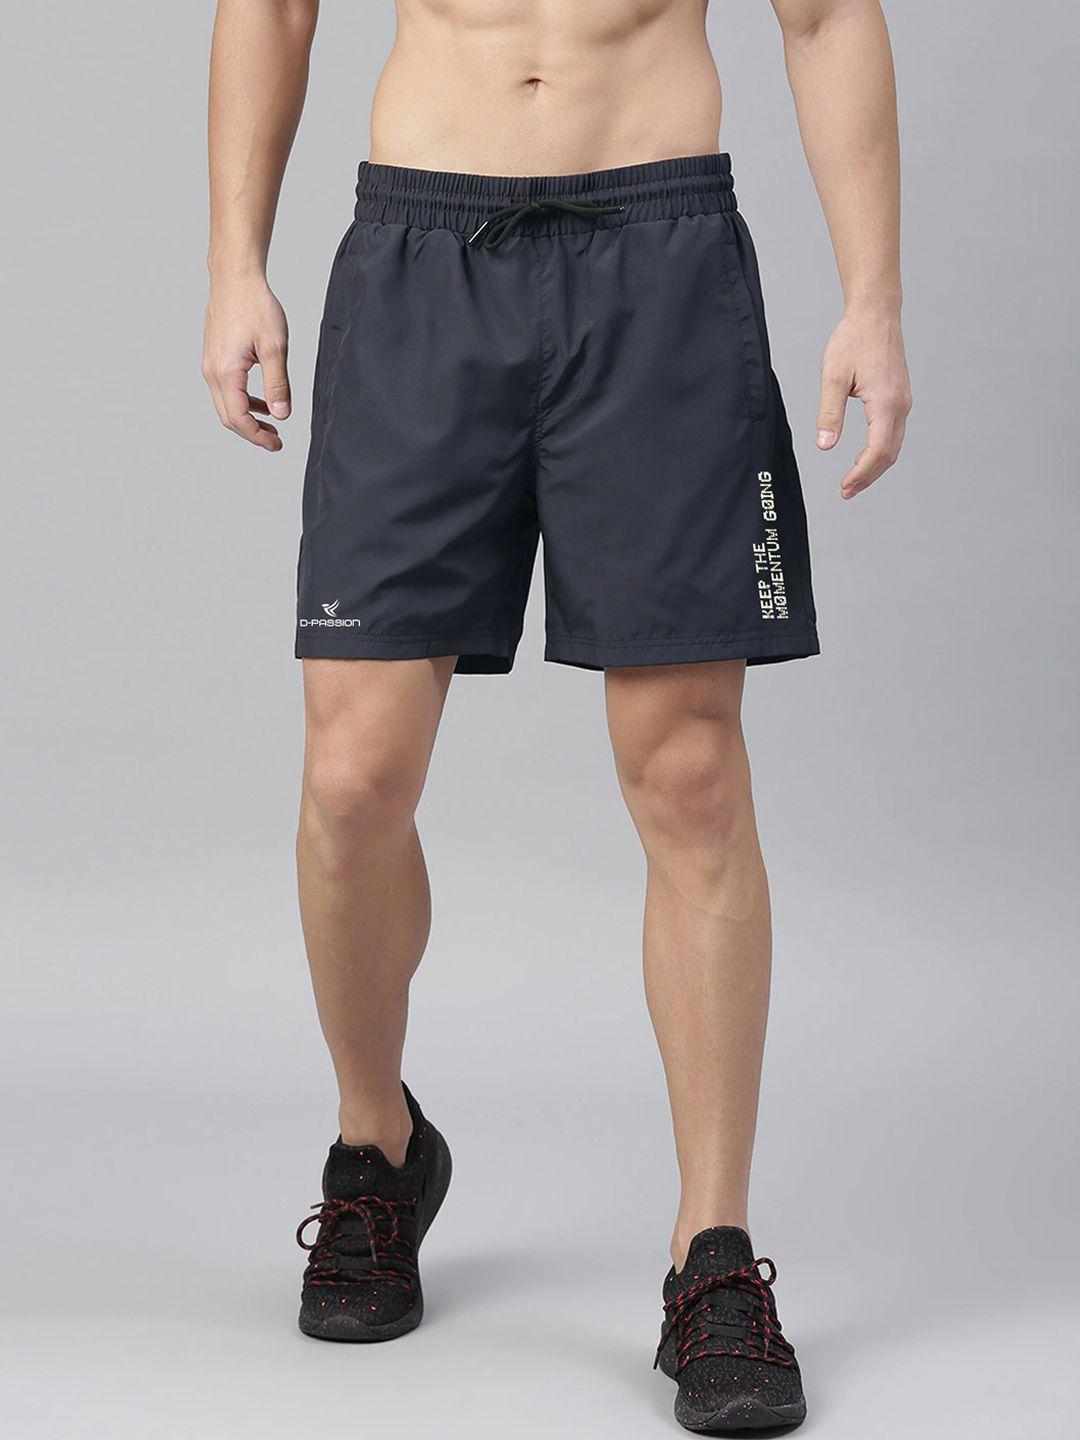 dpassion men navy blue solid training or gym sports shorts